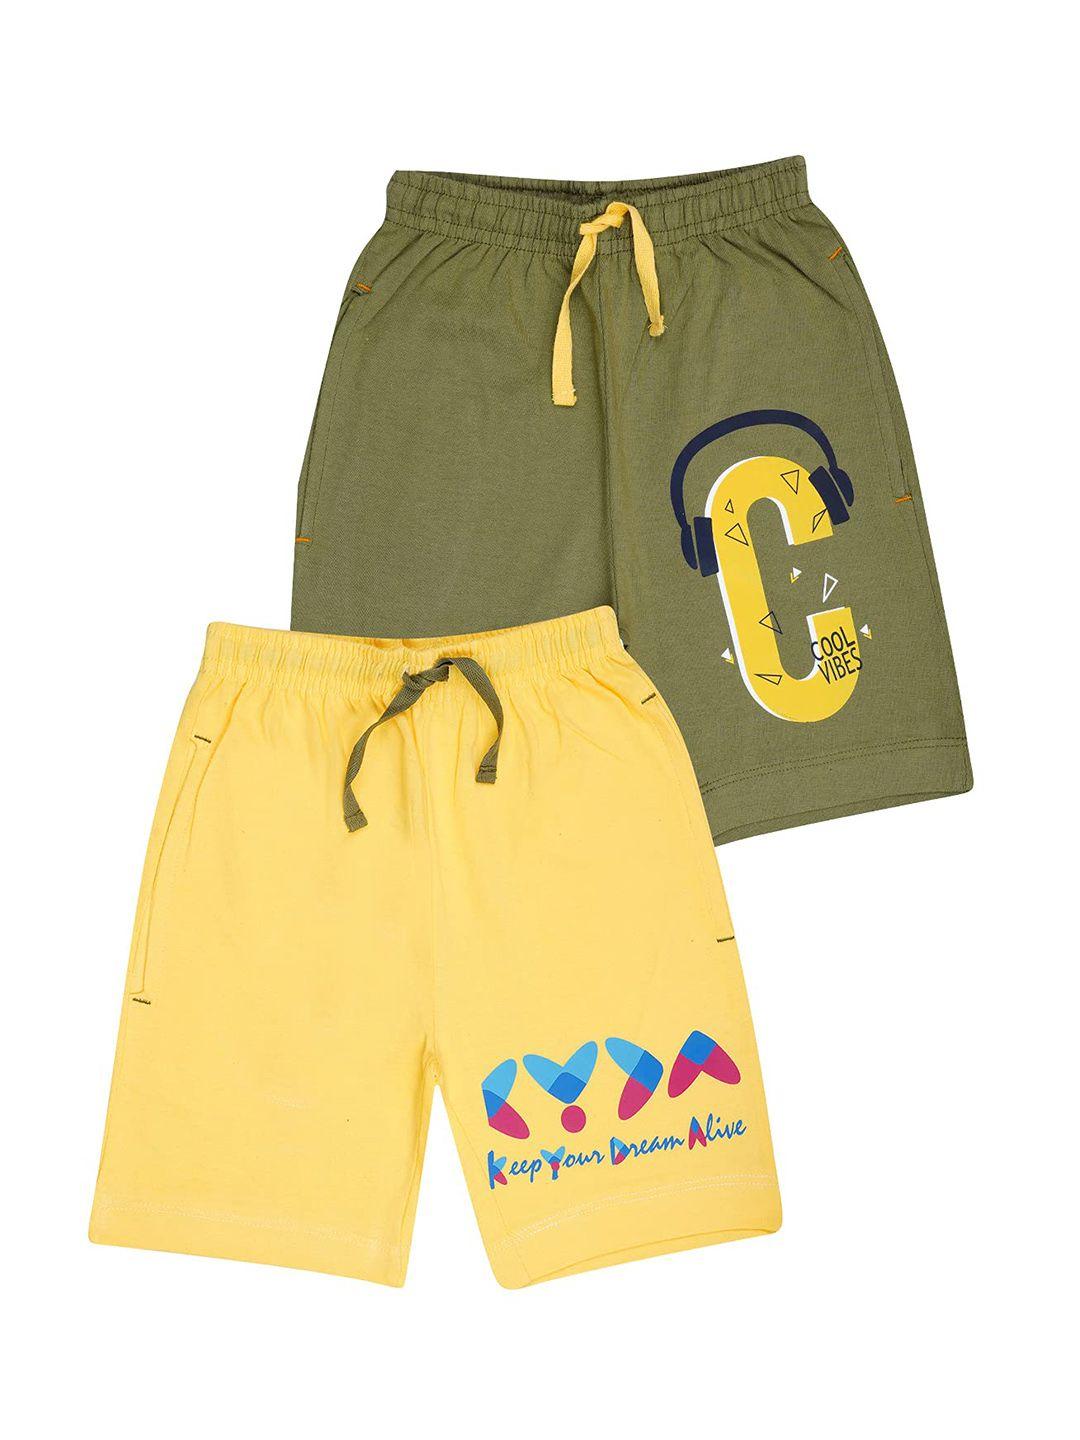 kyda kids boys olive & yellow pack of 2 graphic printed shorts